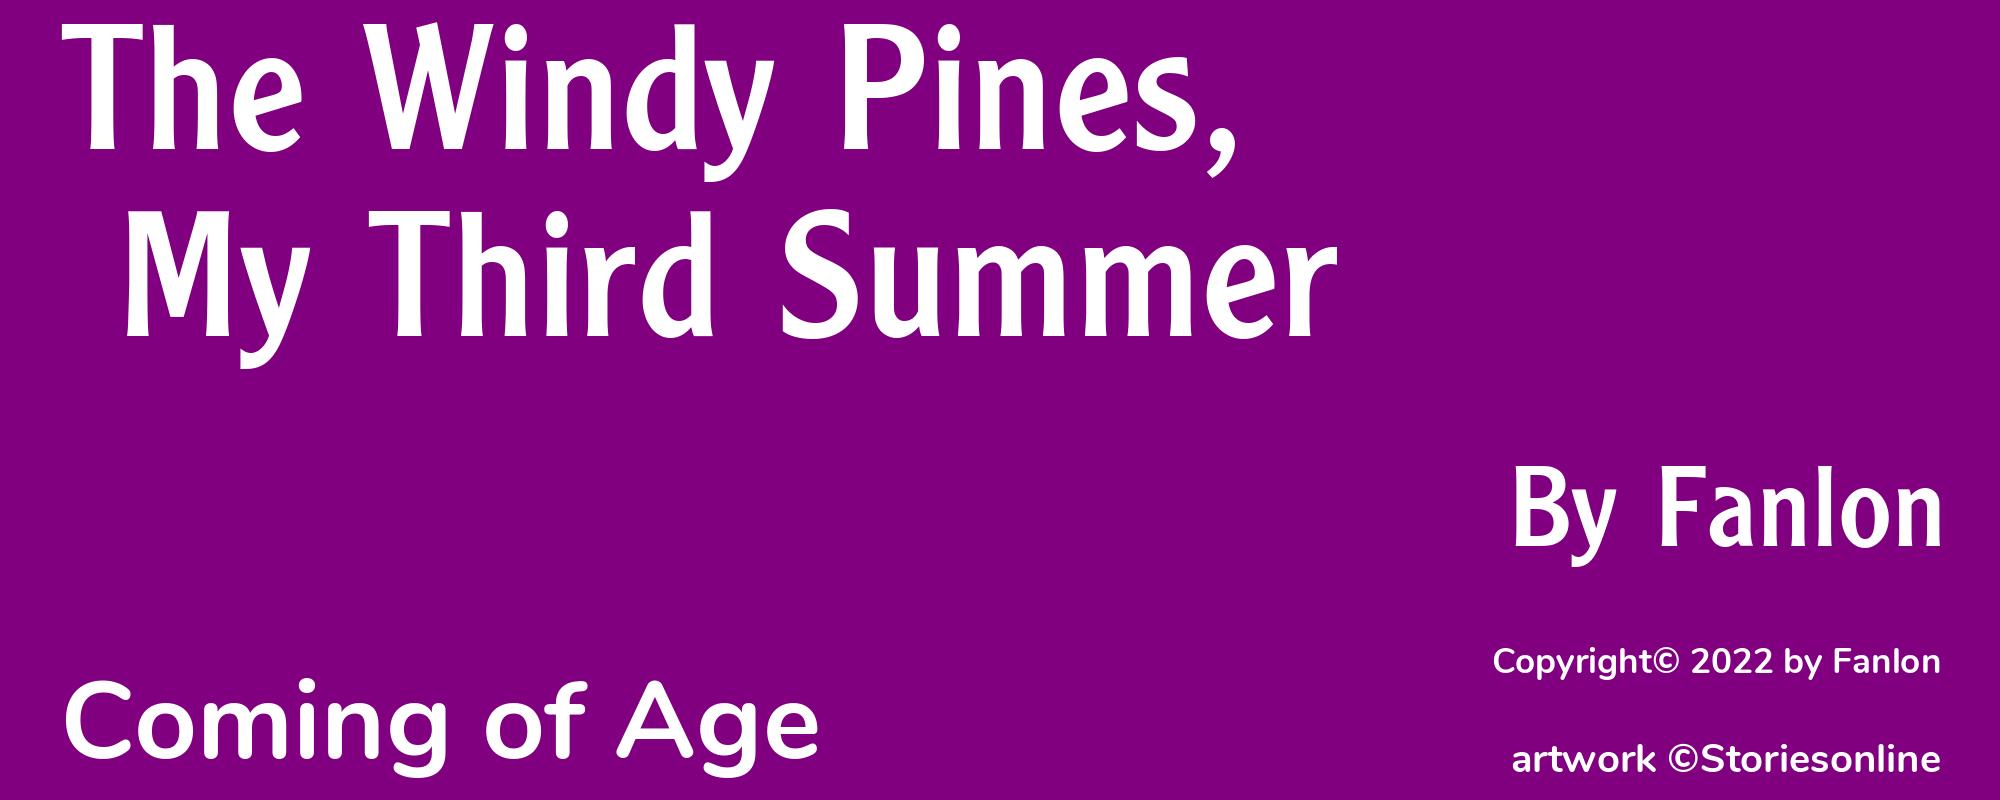 The Windy Pines, My Third Summer - Cover